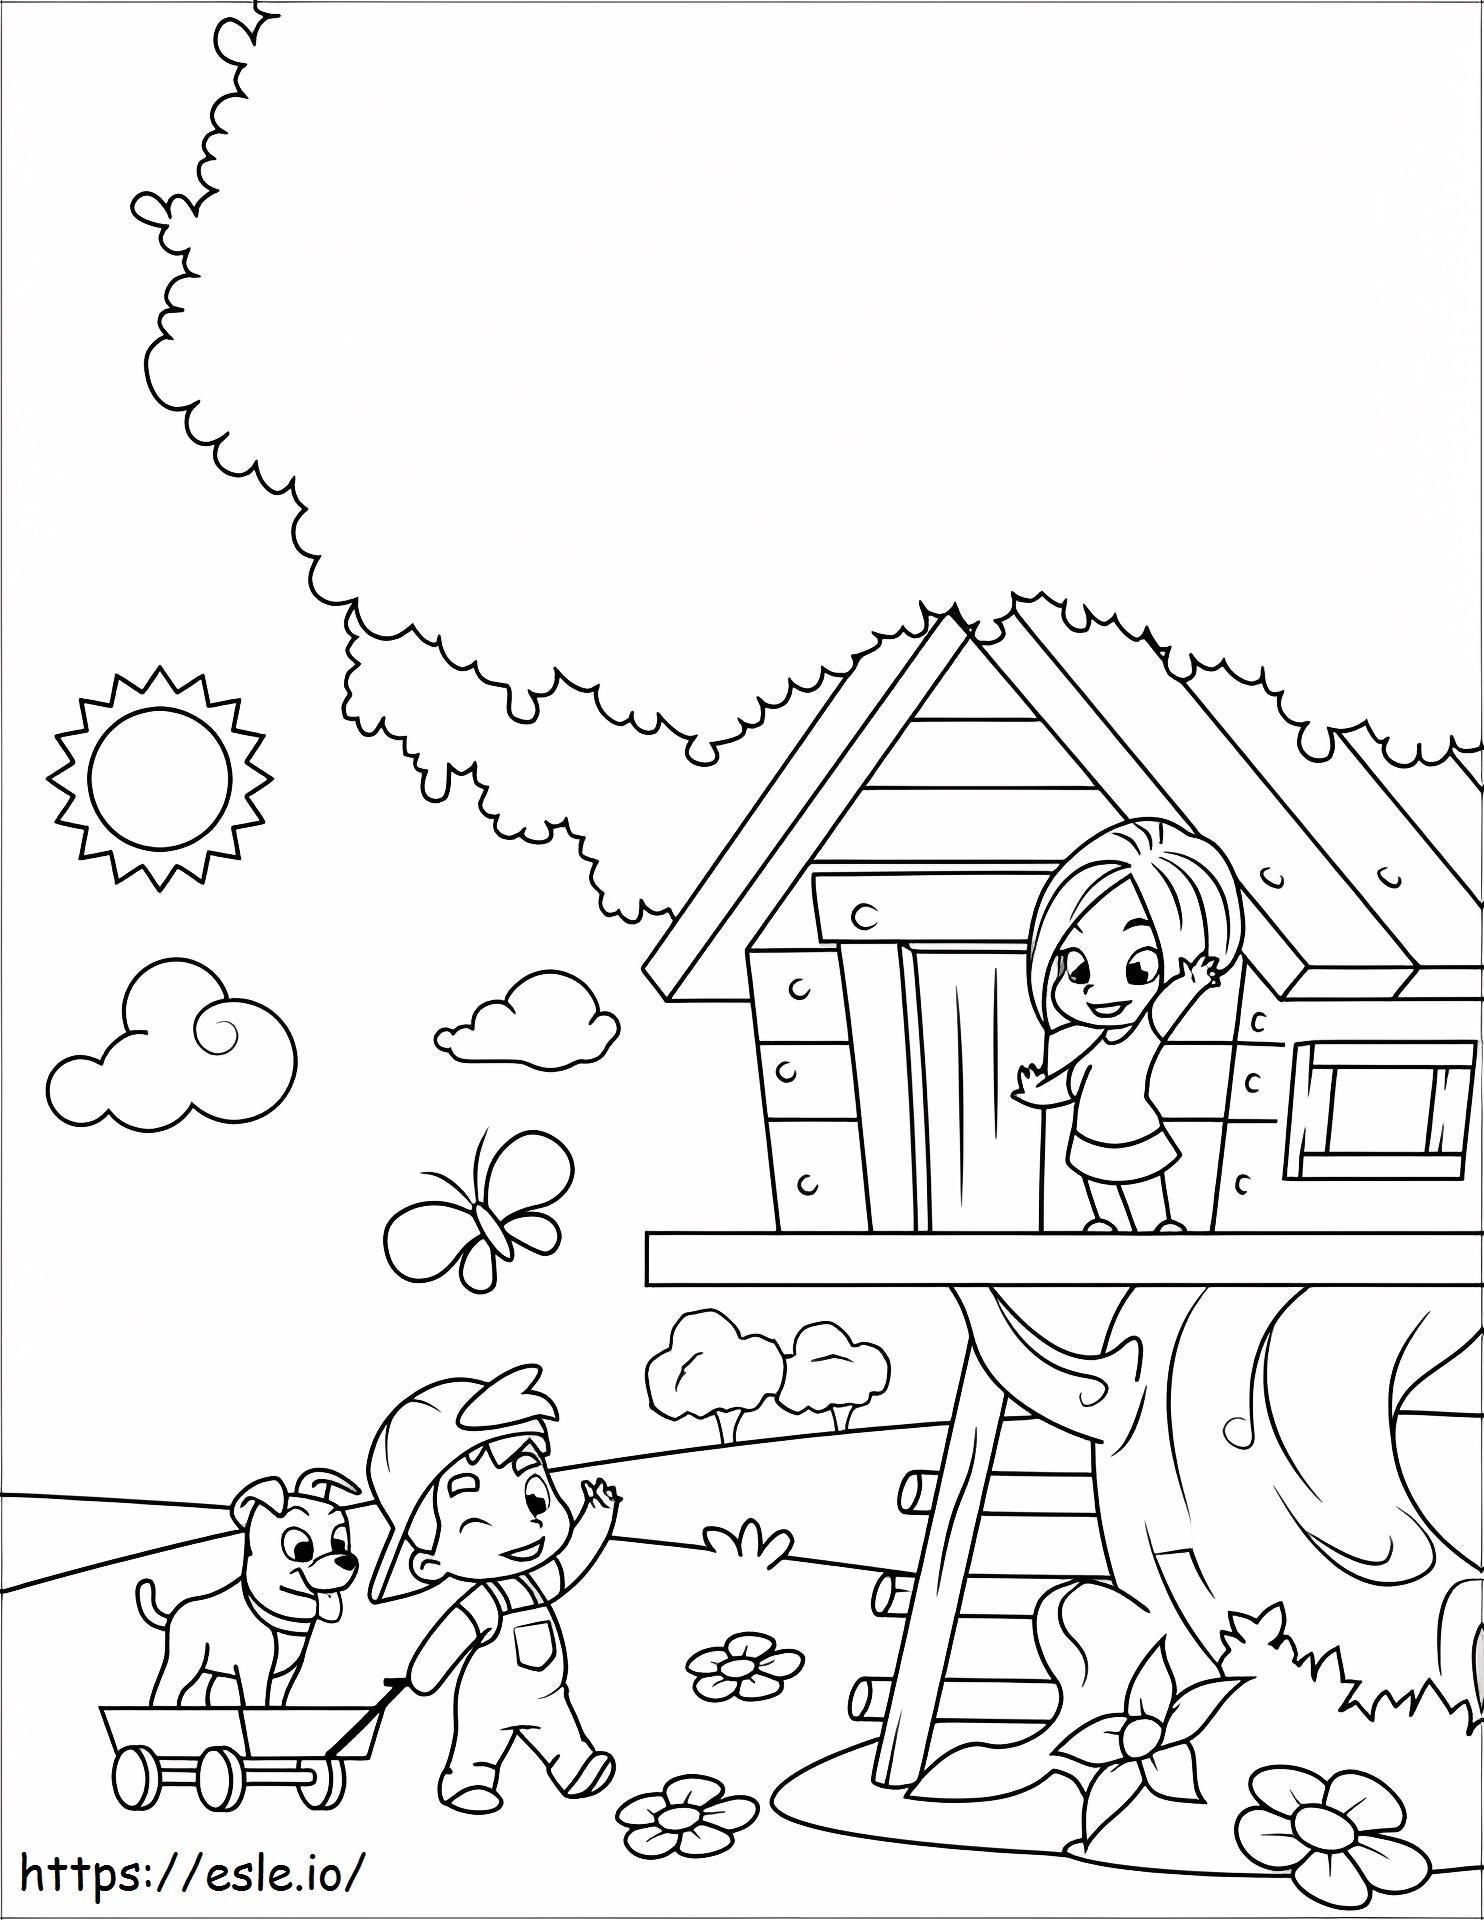 1533008910 Happy Boy And Girl A4 coloring page